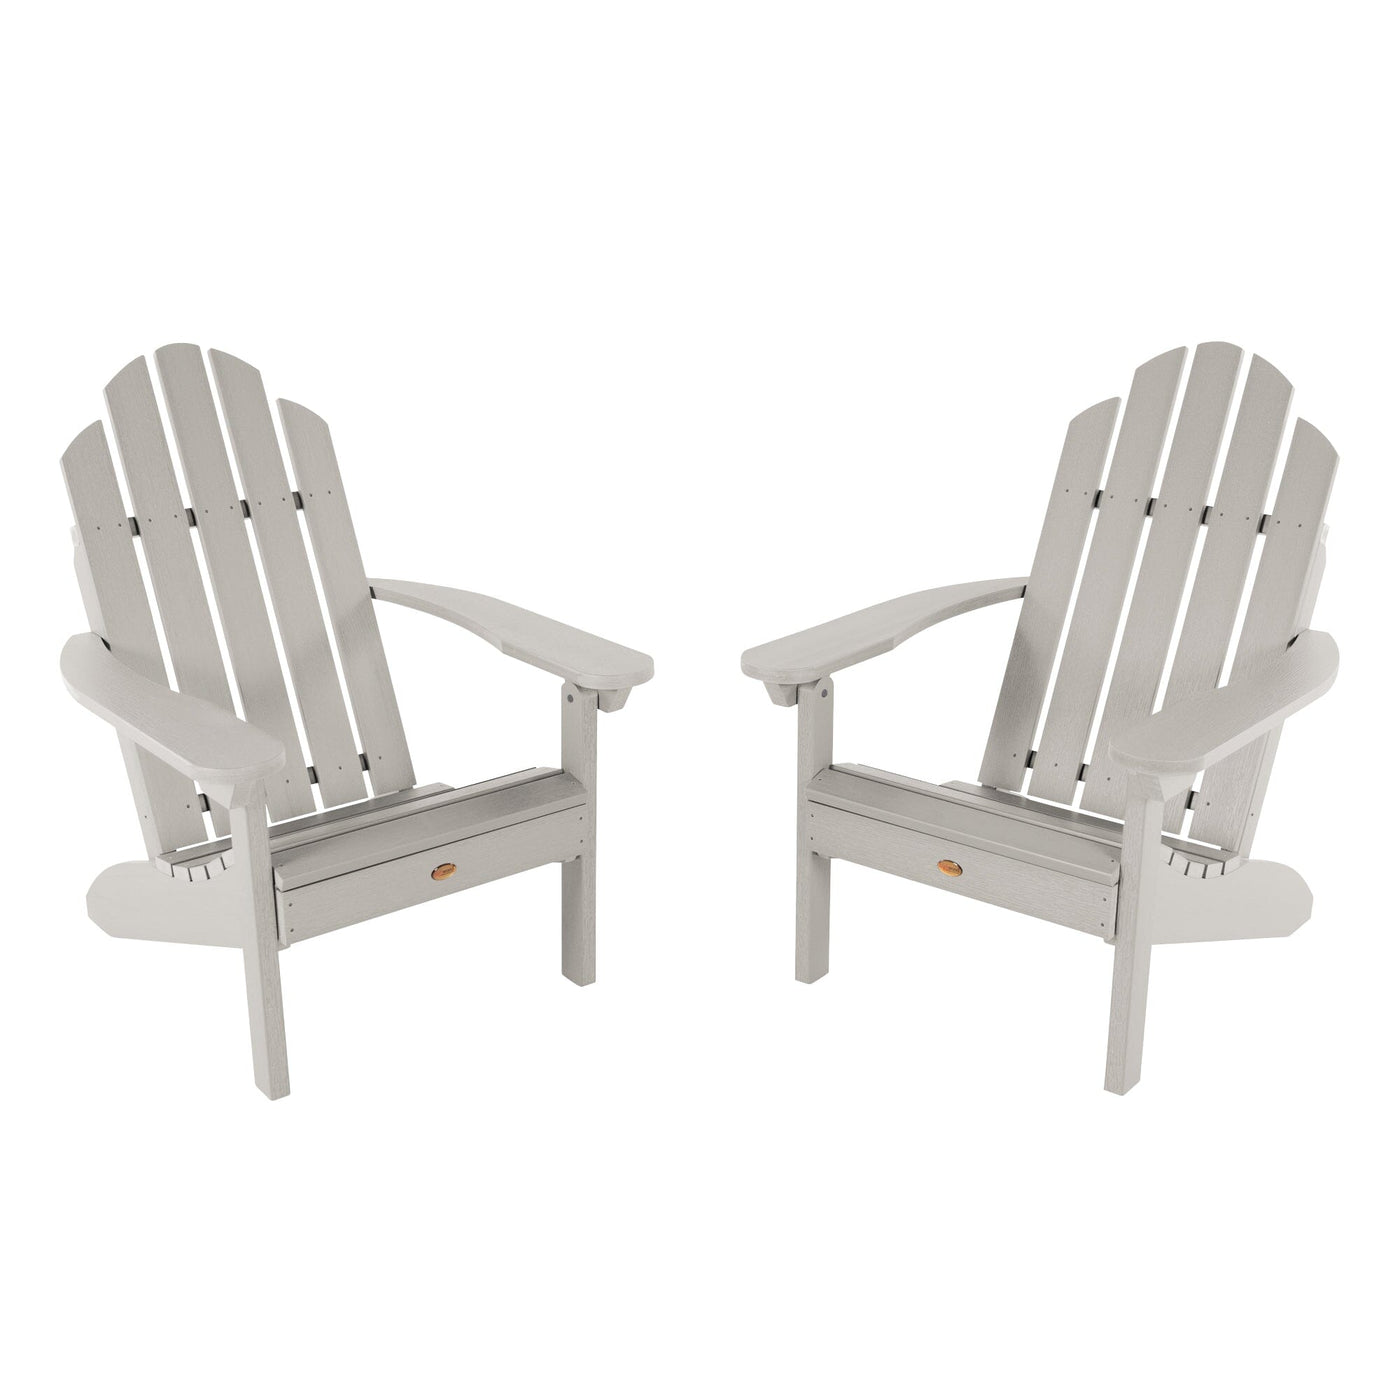 Set of Two Classic Westport Adirondack Chairs Kitted Sets Highwood USA Harbor Gray 